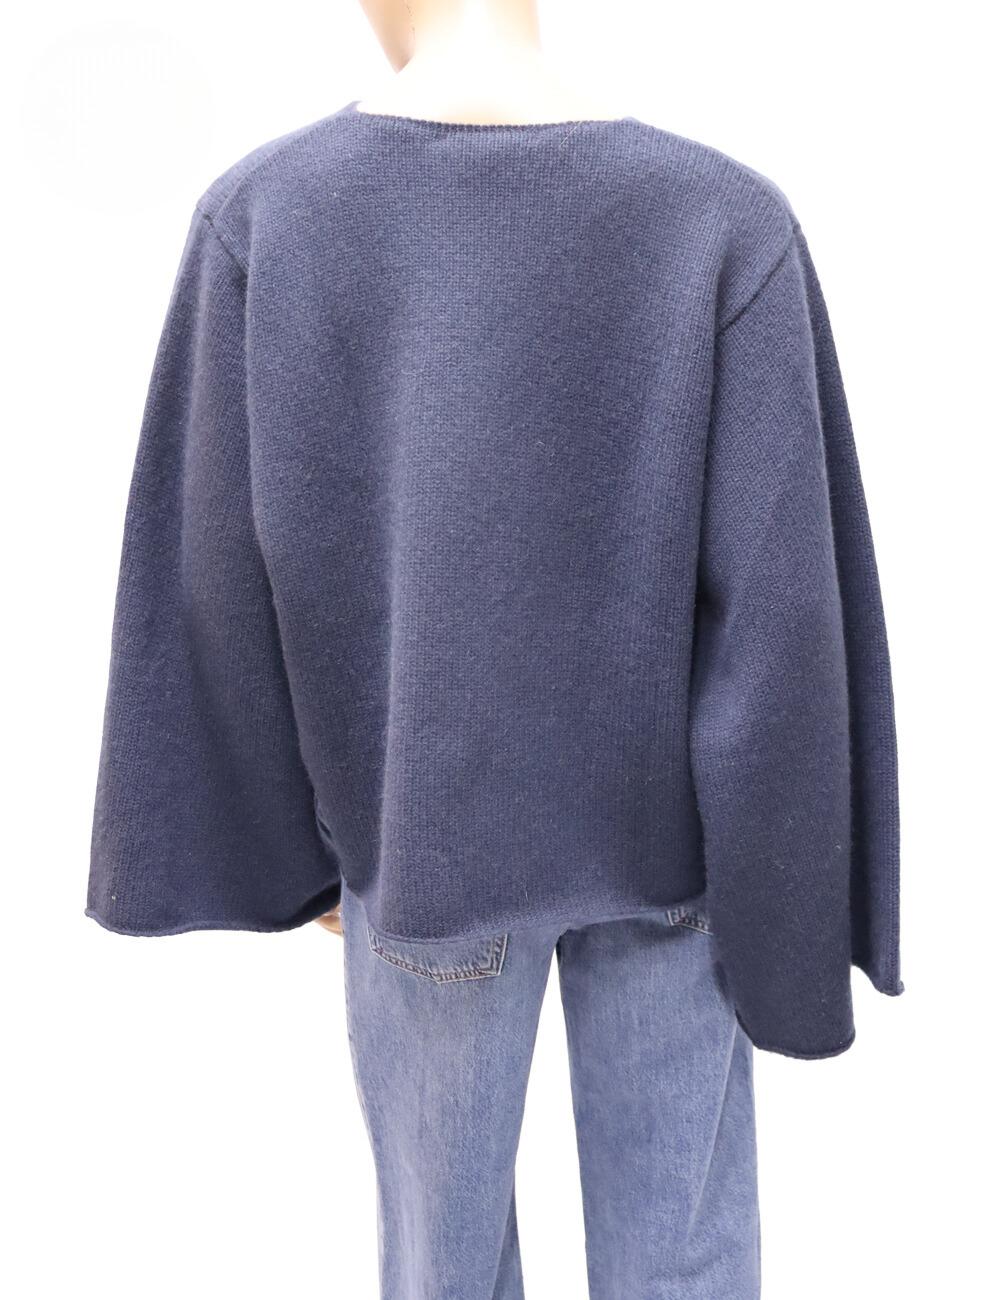 Chloé Women's Blue Wide-sleeve Wool Sweater, Features Long Sleeve and Boat-Neck.

Material:  100% Cashmere
Size: EU 38 / Medium (Oversize Fit)
Bust: 92cm
Waist: 75cm
Hip: 100cm
Overall Condition: Very good